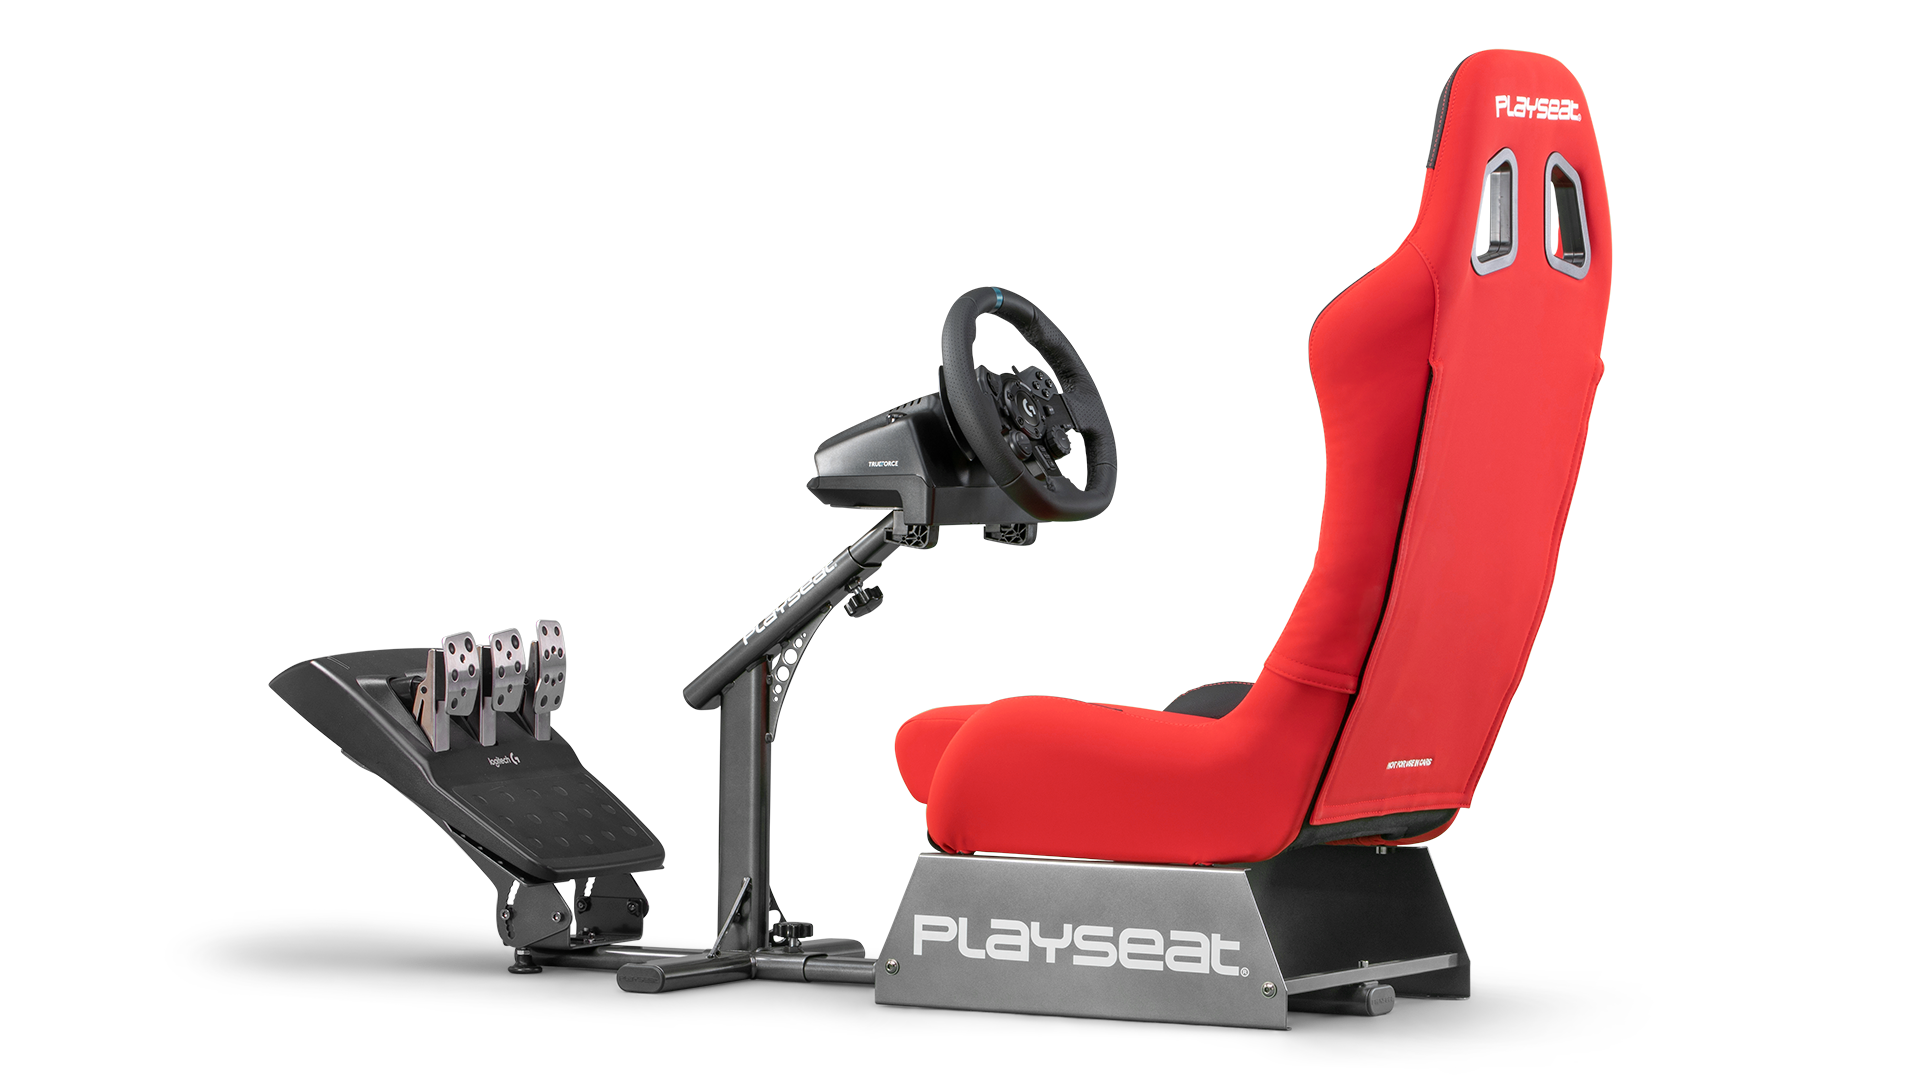 playseat-evolution-red-racing-simulator-back-angle-view-logitech-1920x1080-1.png